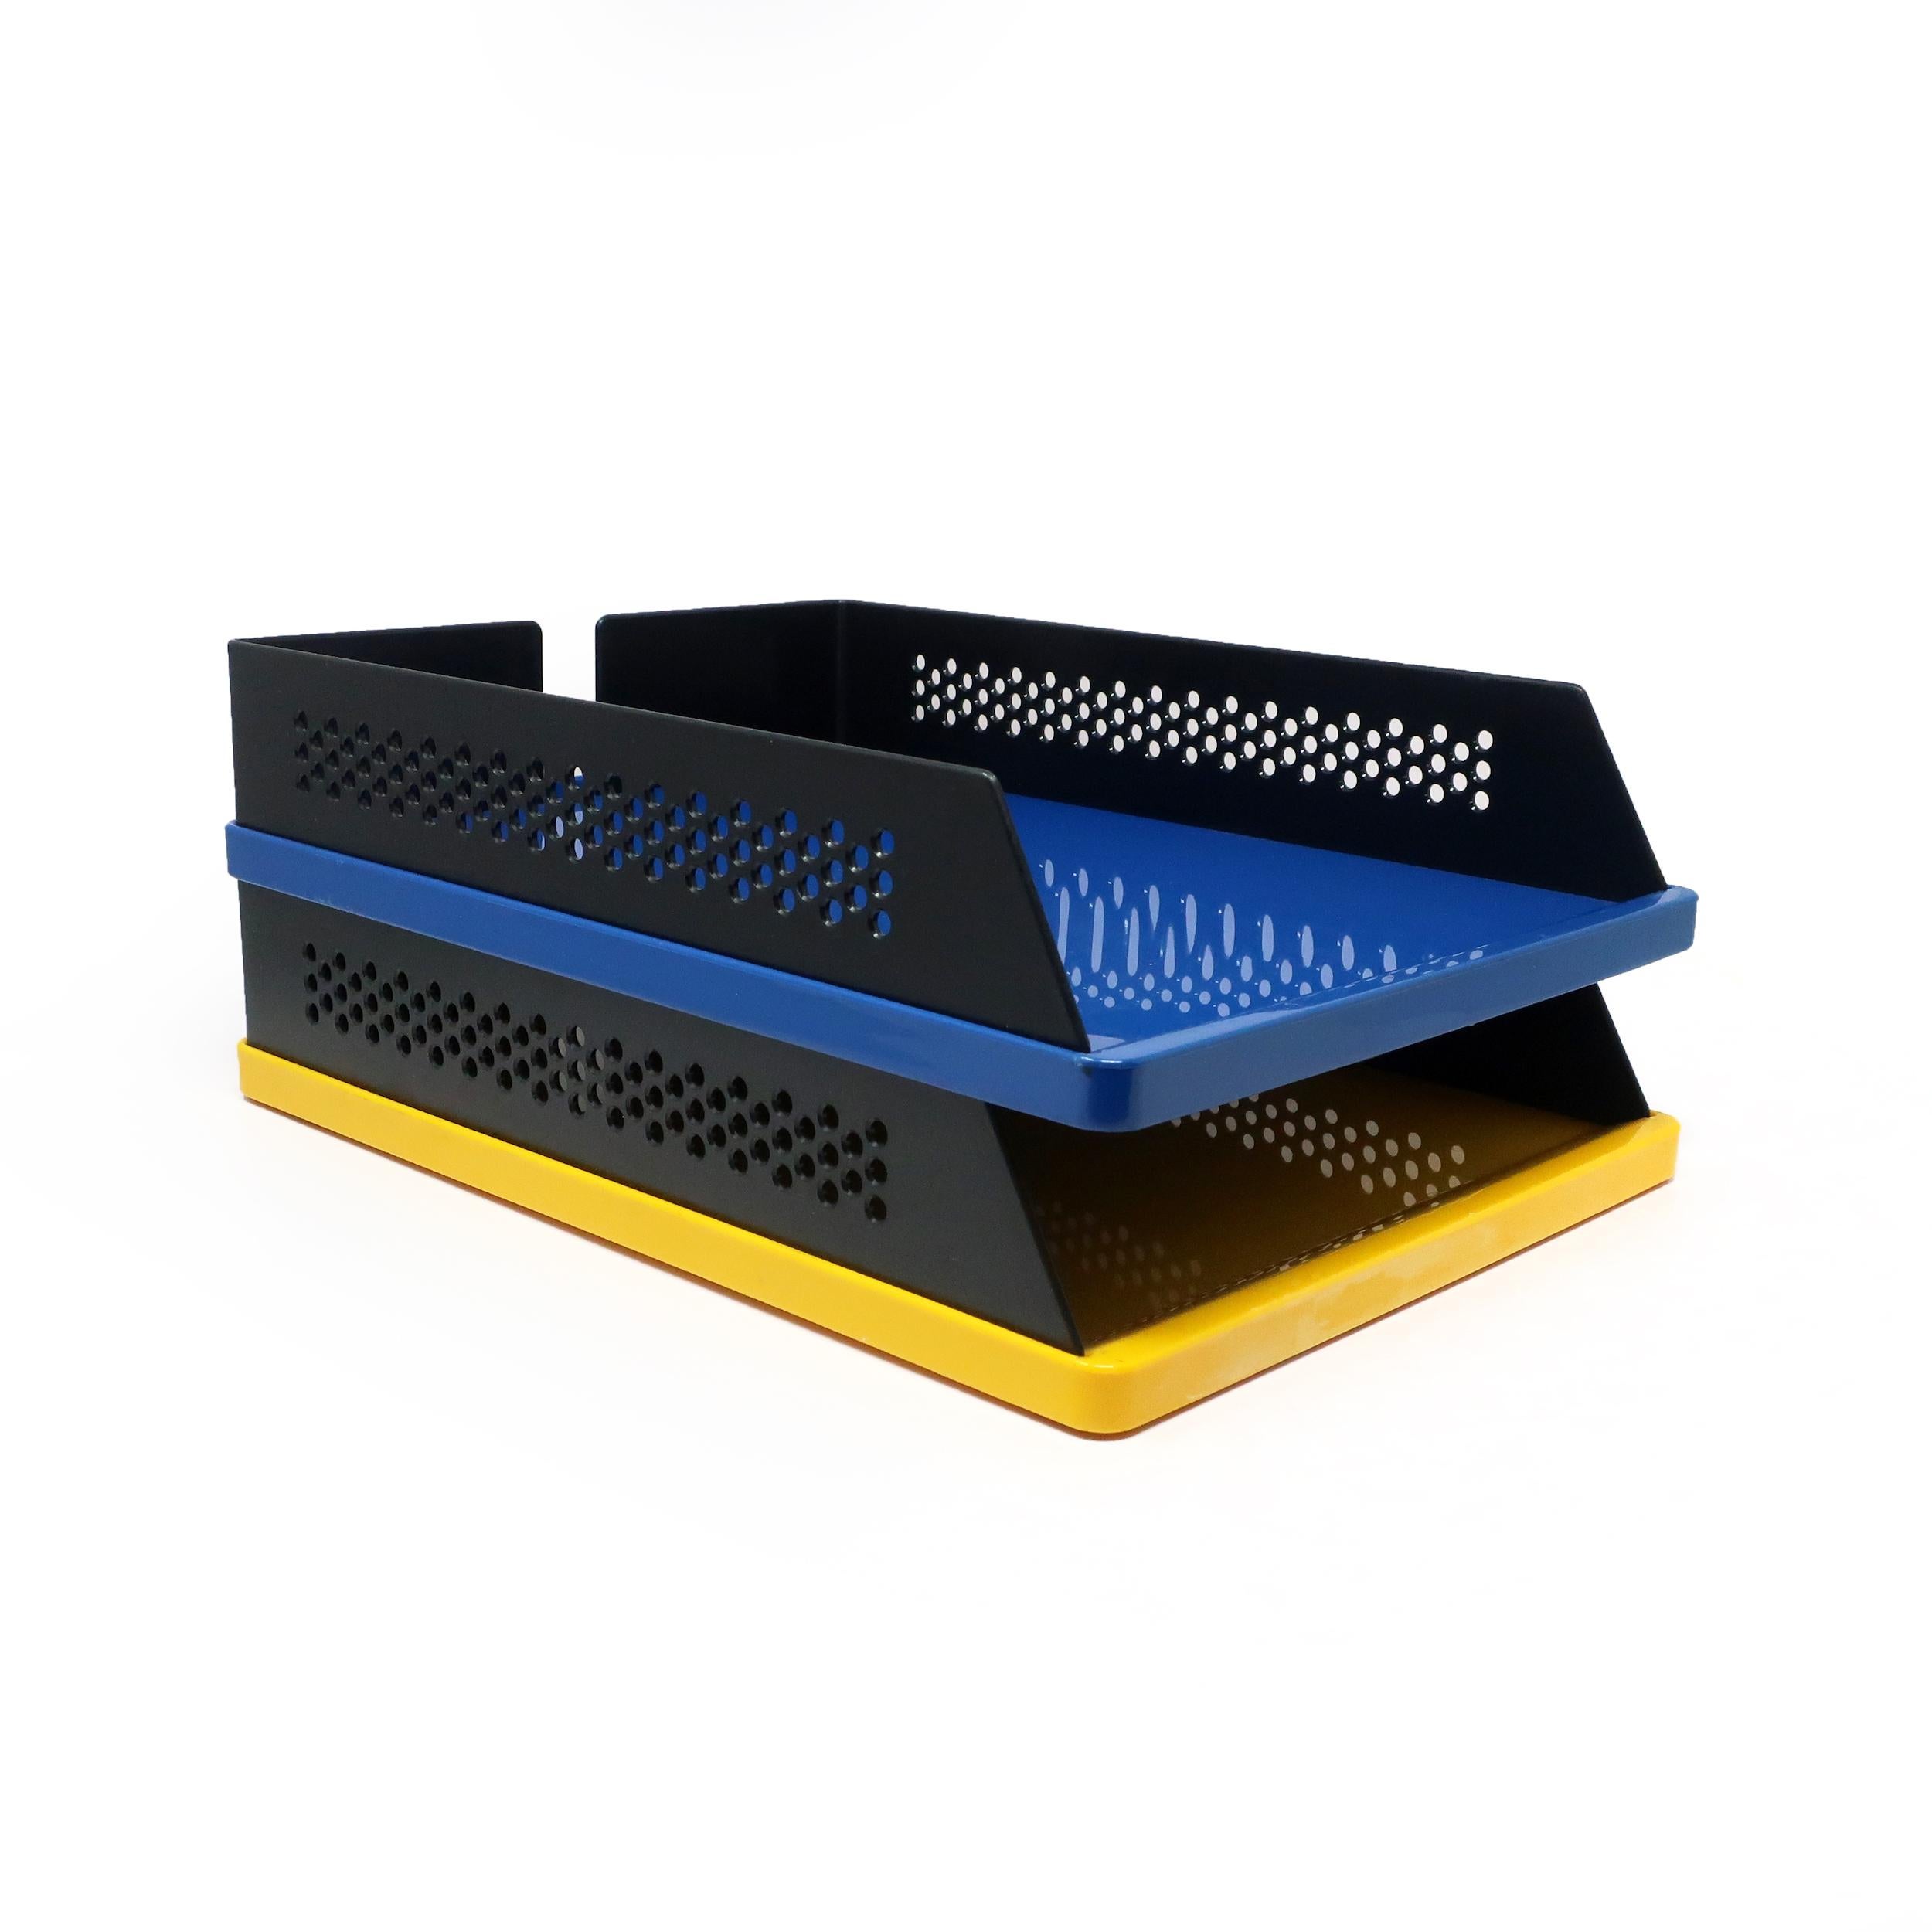 Italian Pair of Babele 940 Trays and Status Desk Pad by Barbieri & Marianelli for Rexite